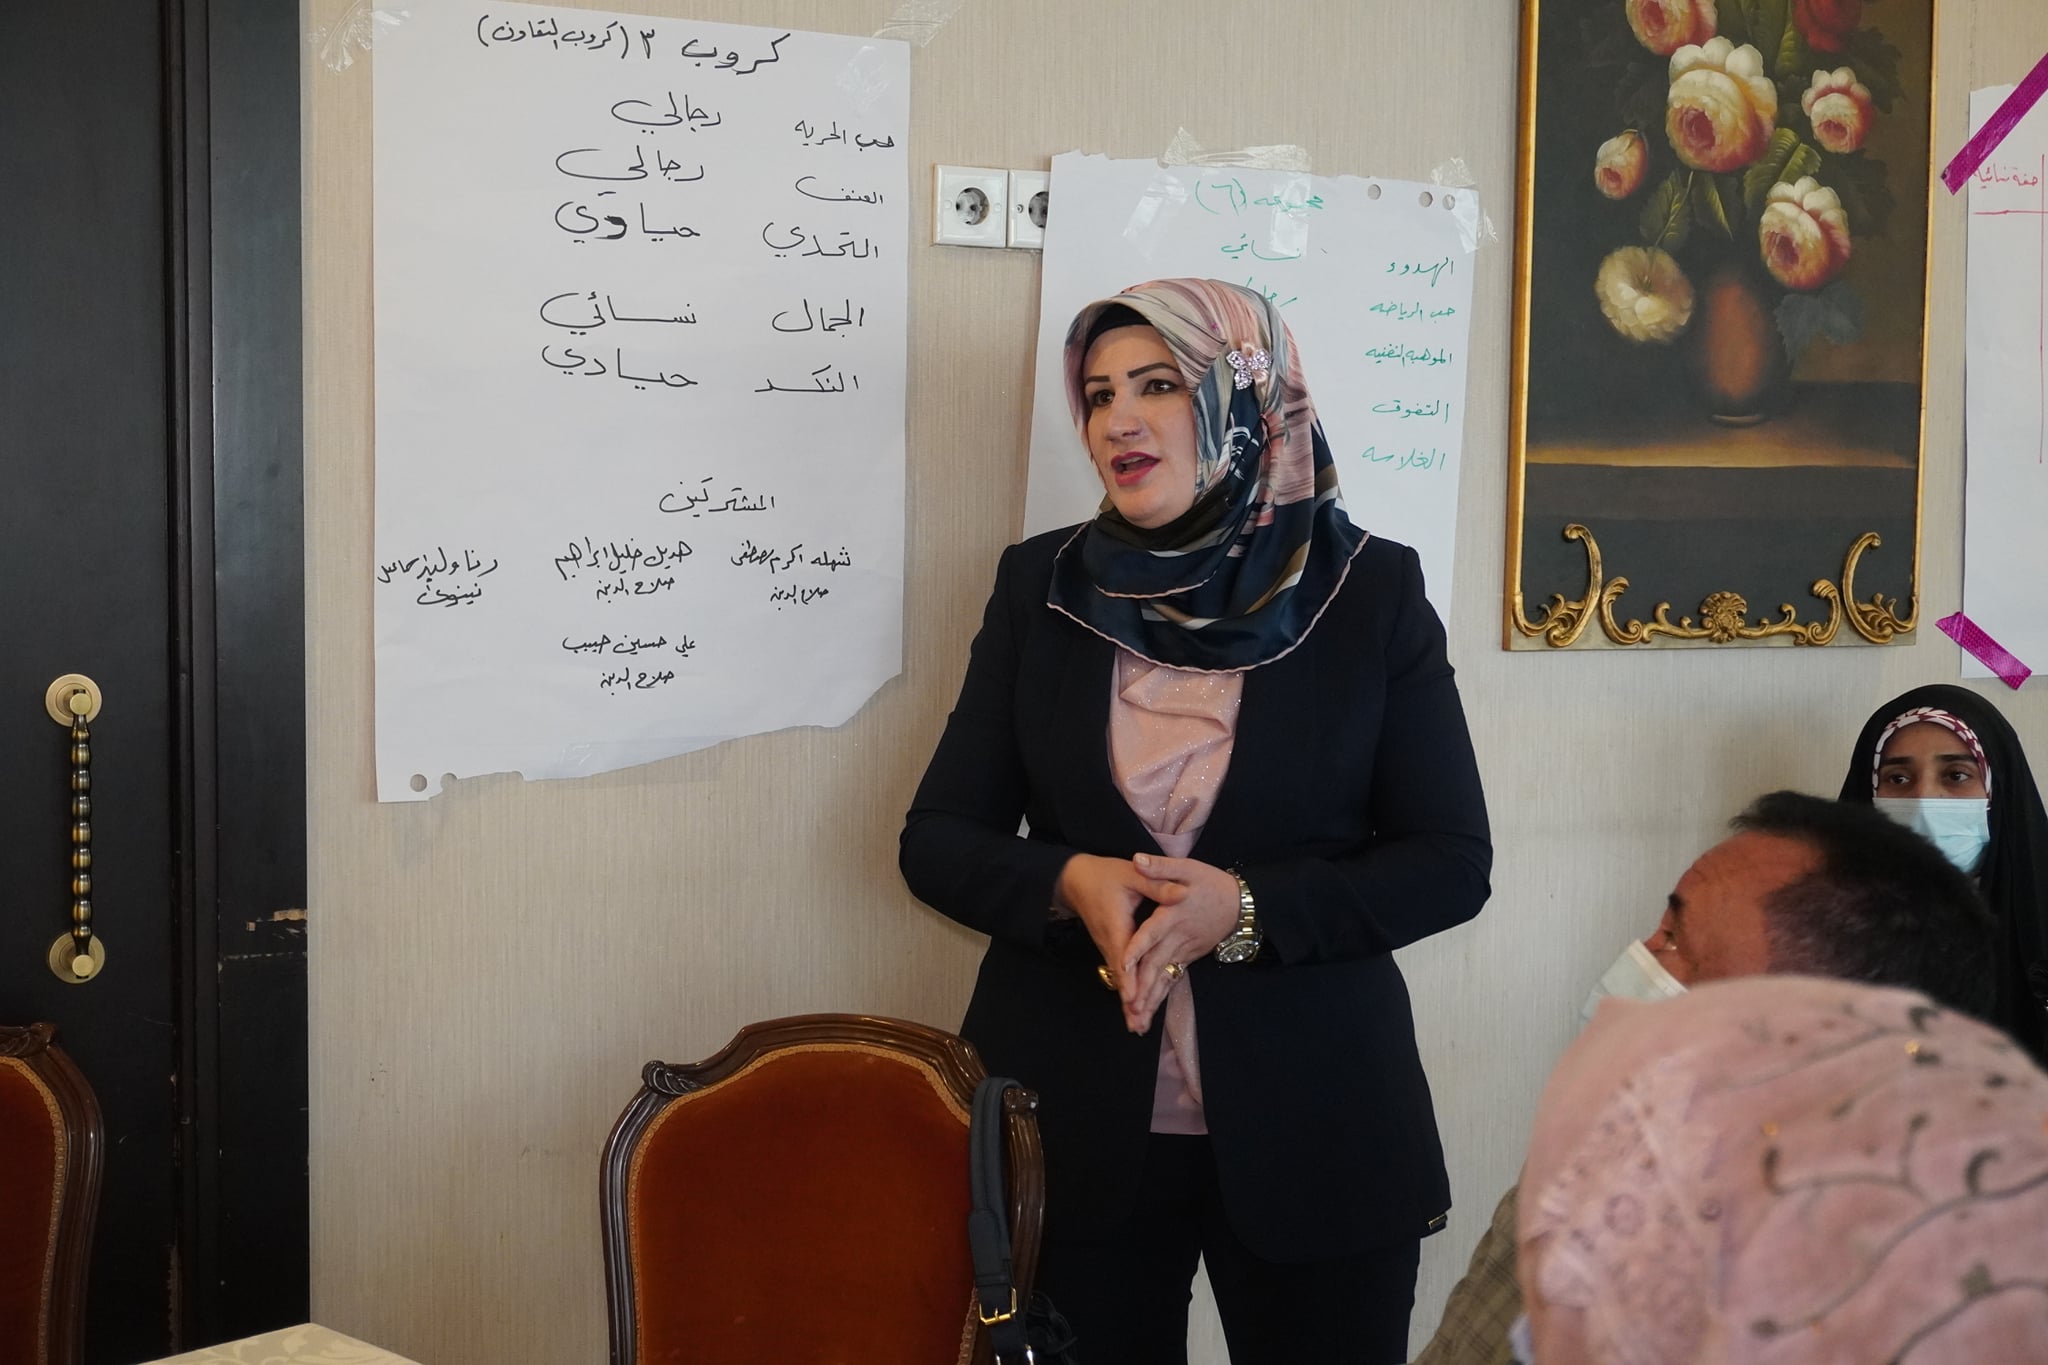 Workshop training about " “International and National Frameworks of Gender Equality, and Gender Mainstreaming in Local Institutions”